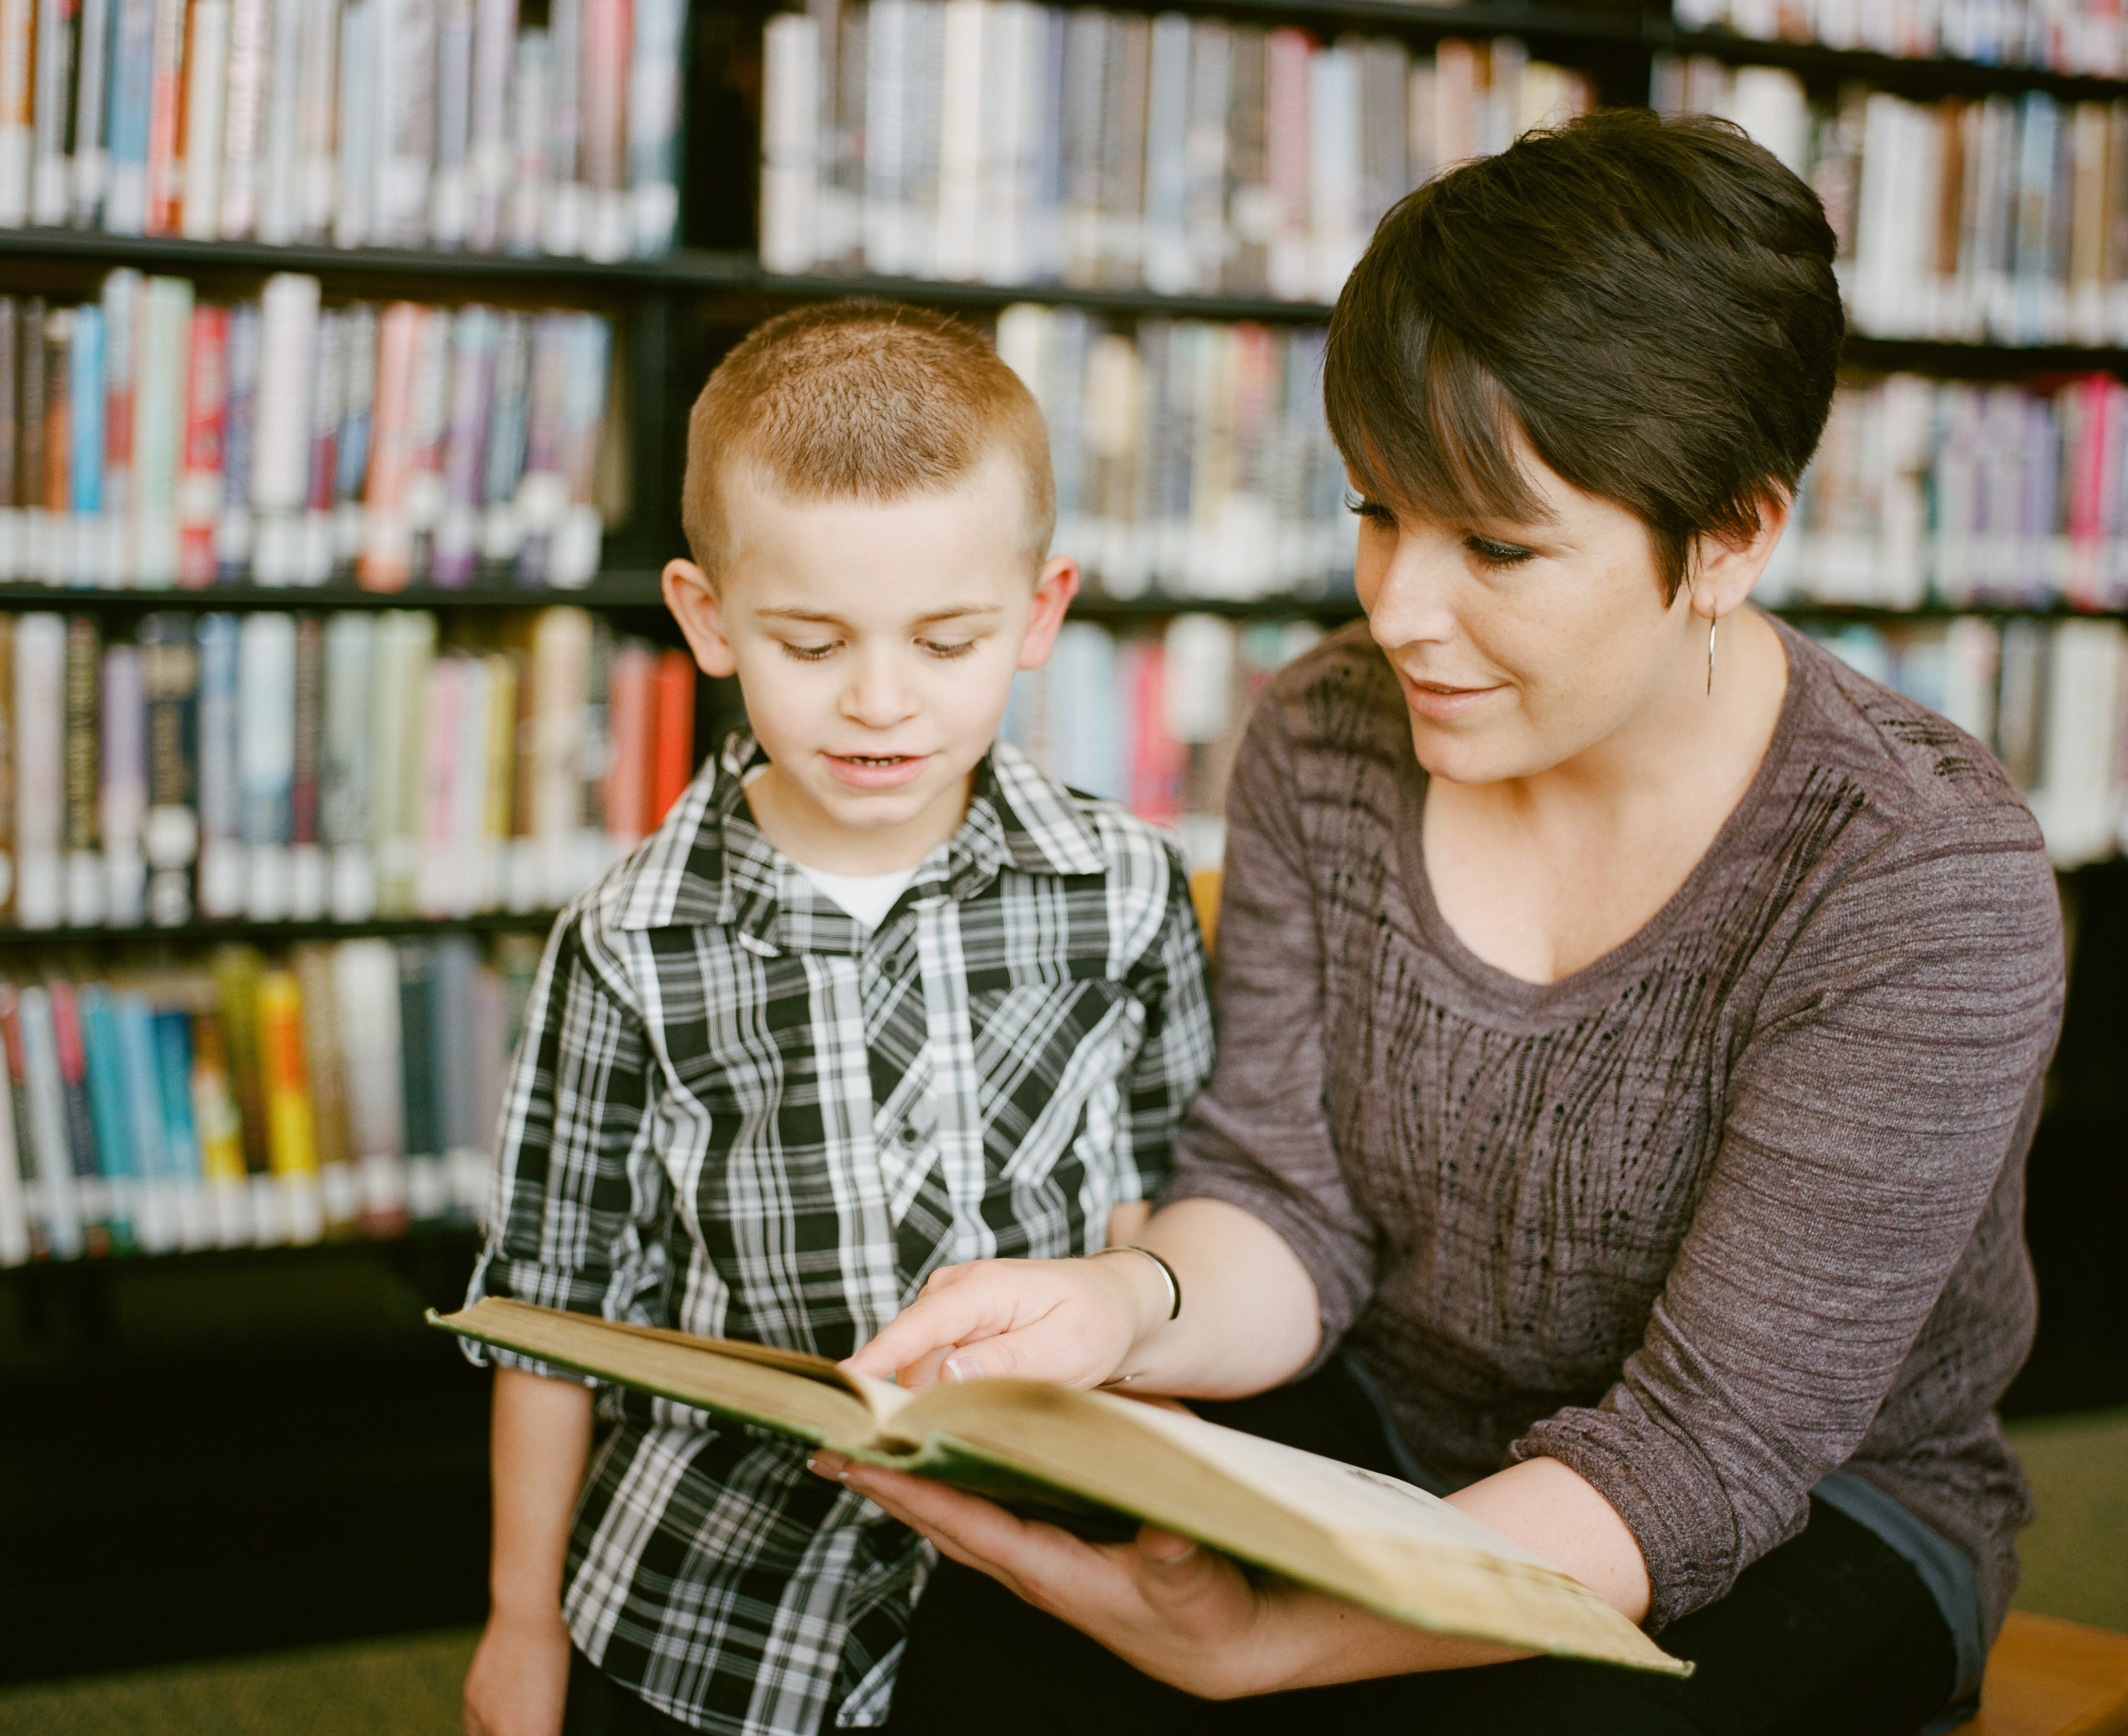 Mother reading to her son as he listens intently. Books in the background are slightly blurred creating the perfect atmosphere to instill a lifelong love of reading. The 3 - 6 year old boy is engaged, happy, the moment is captured in this photo creating a lifelong memory. https://www.awcreativeut.com https://www.instagram.com/AwCreativeUT/ #AwCreativeUT #awcreative #AdamWinger